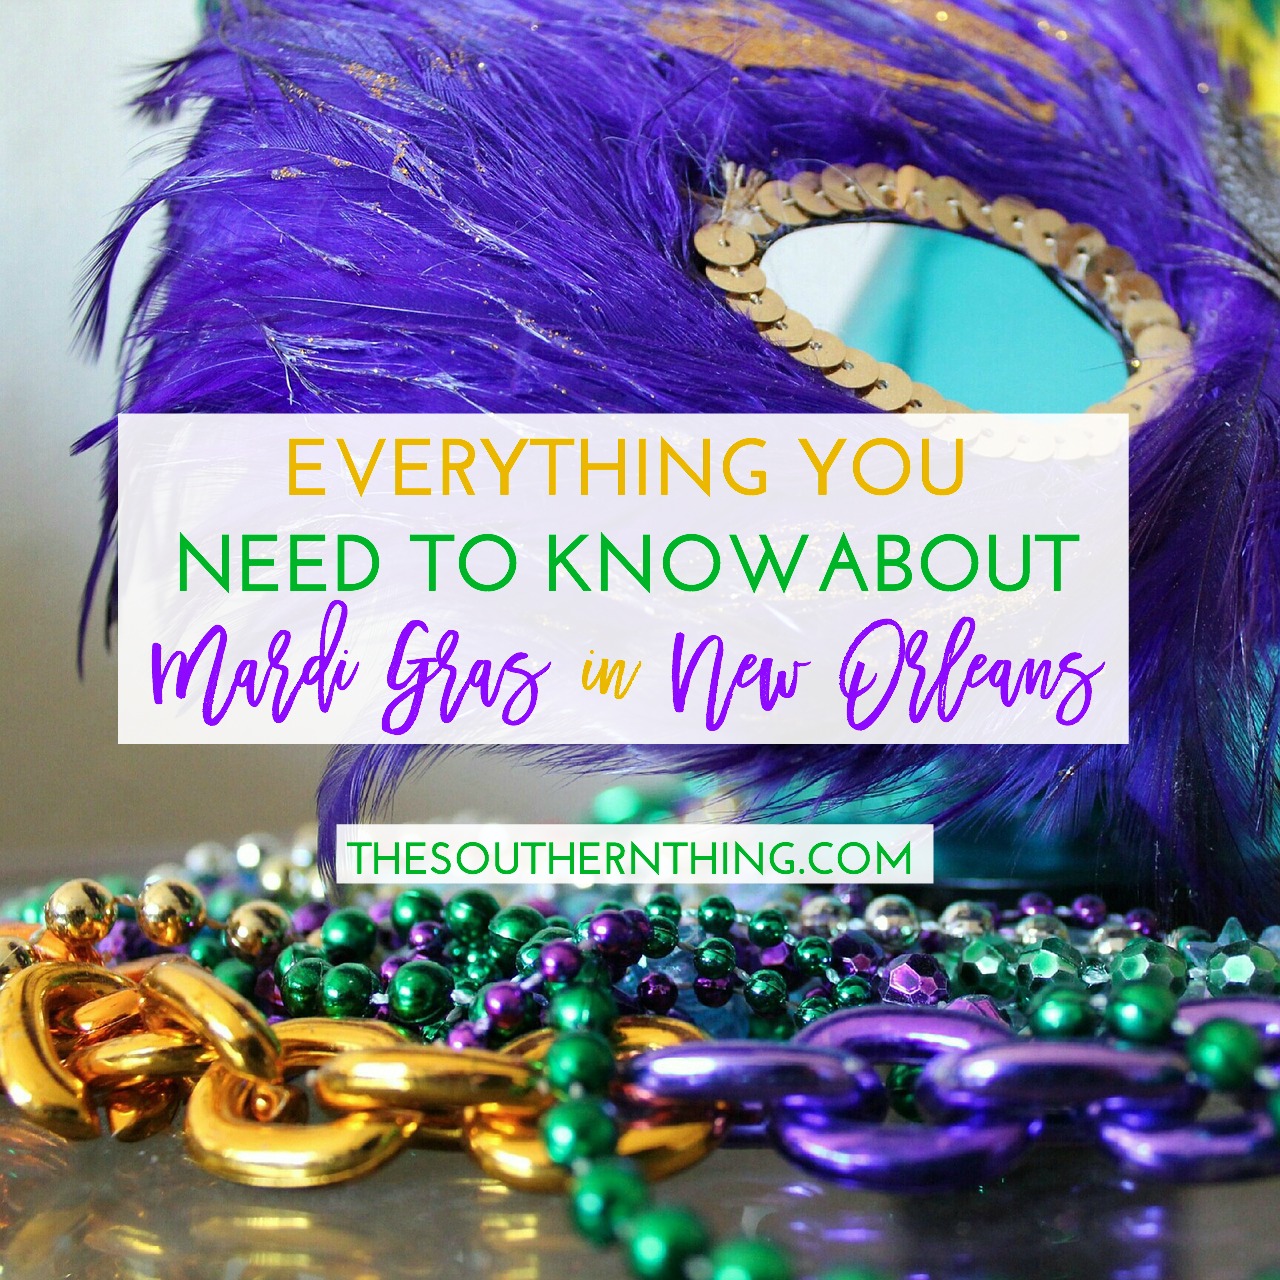 Everything You Need to Know About Mardi Gras in New Orleans